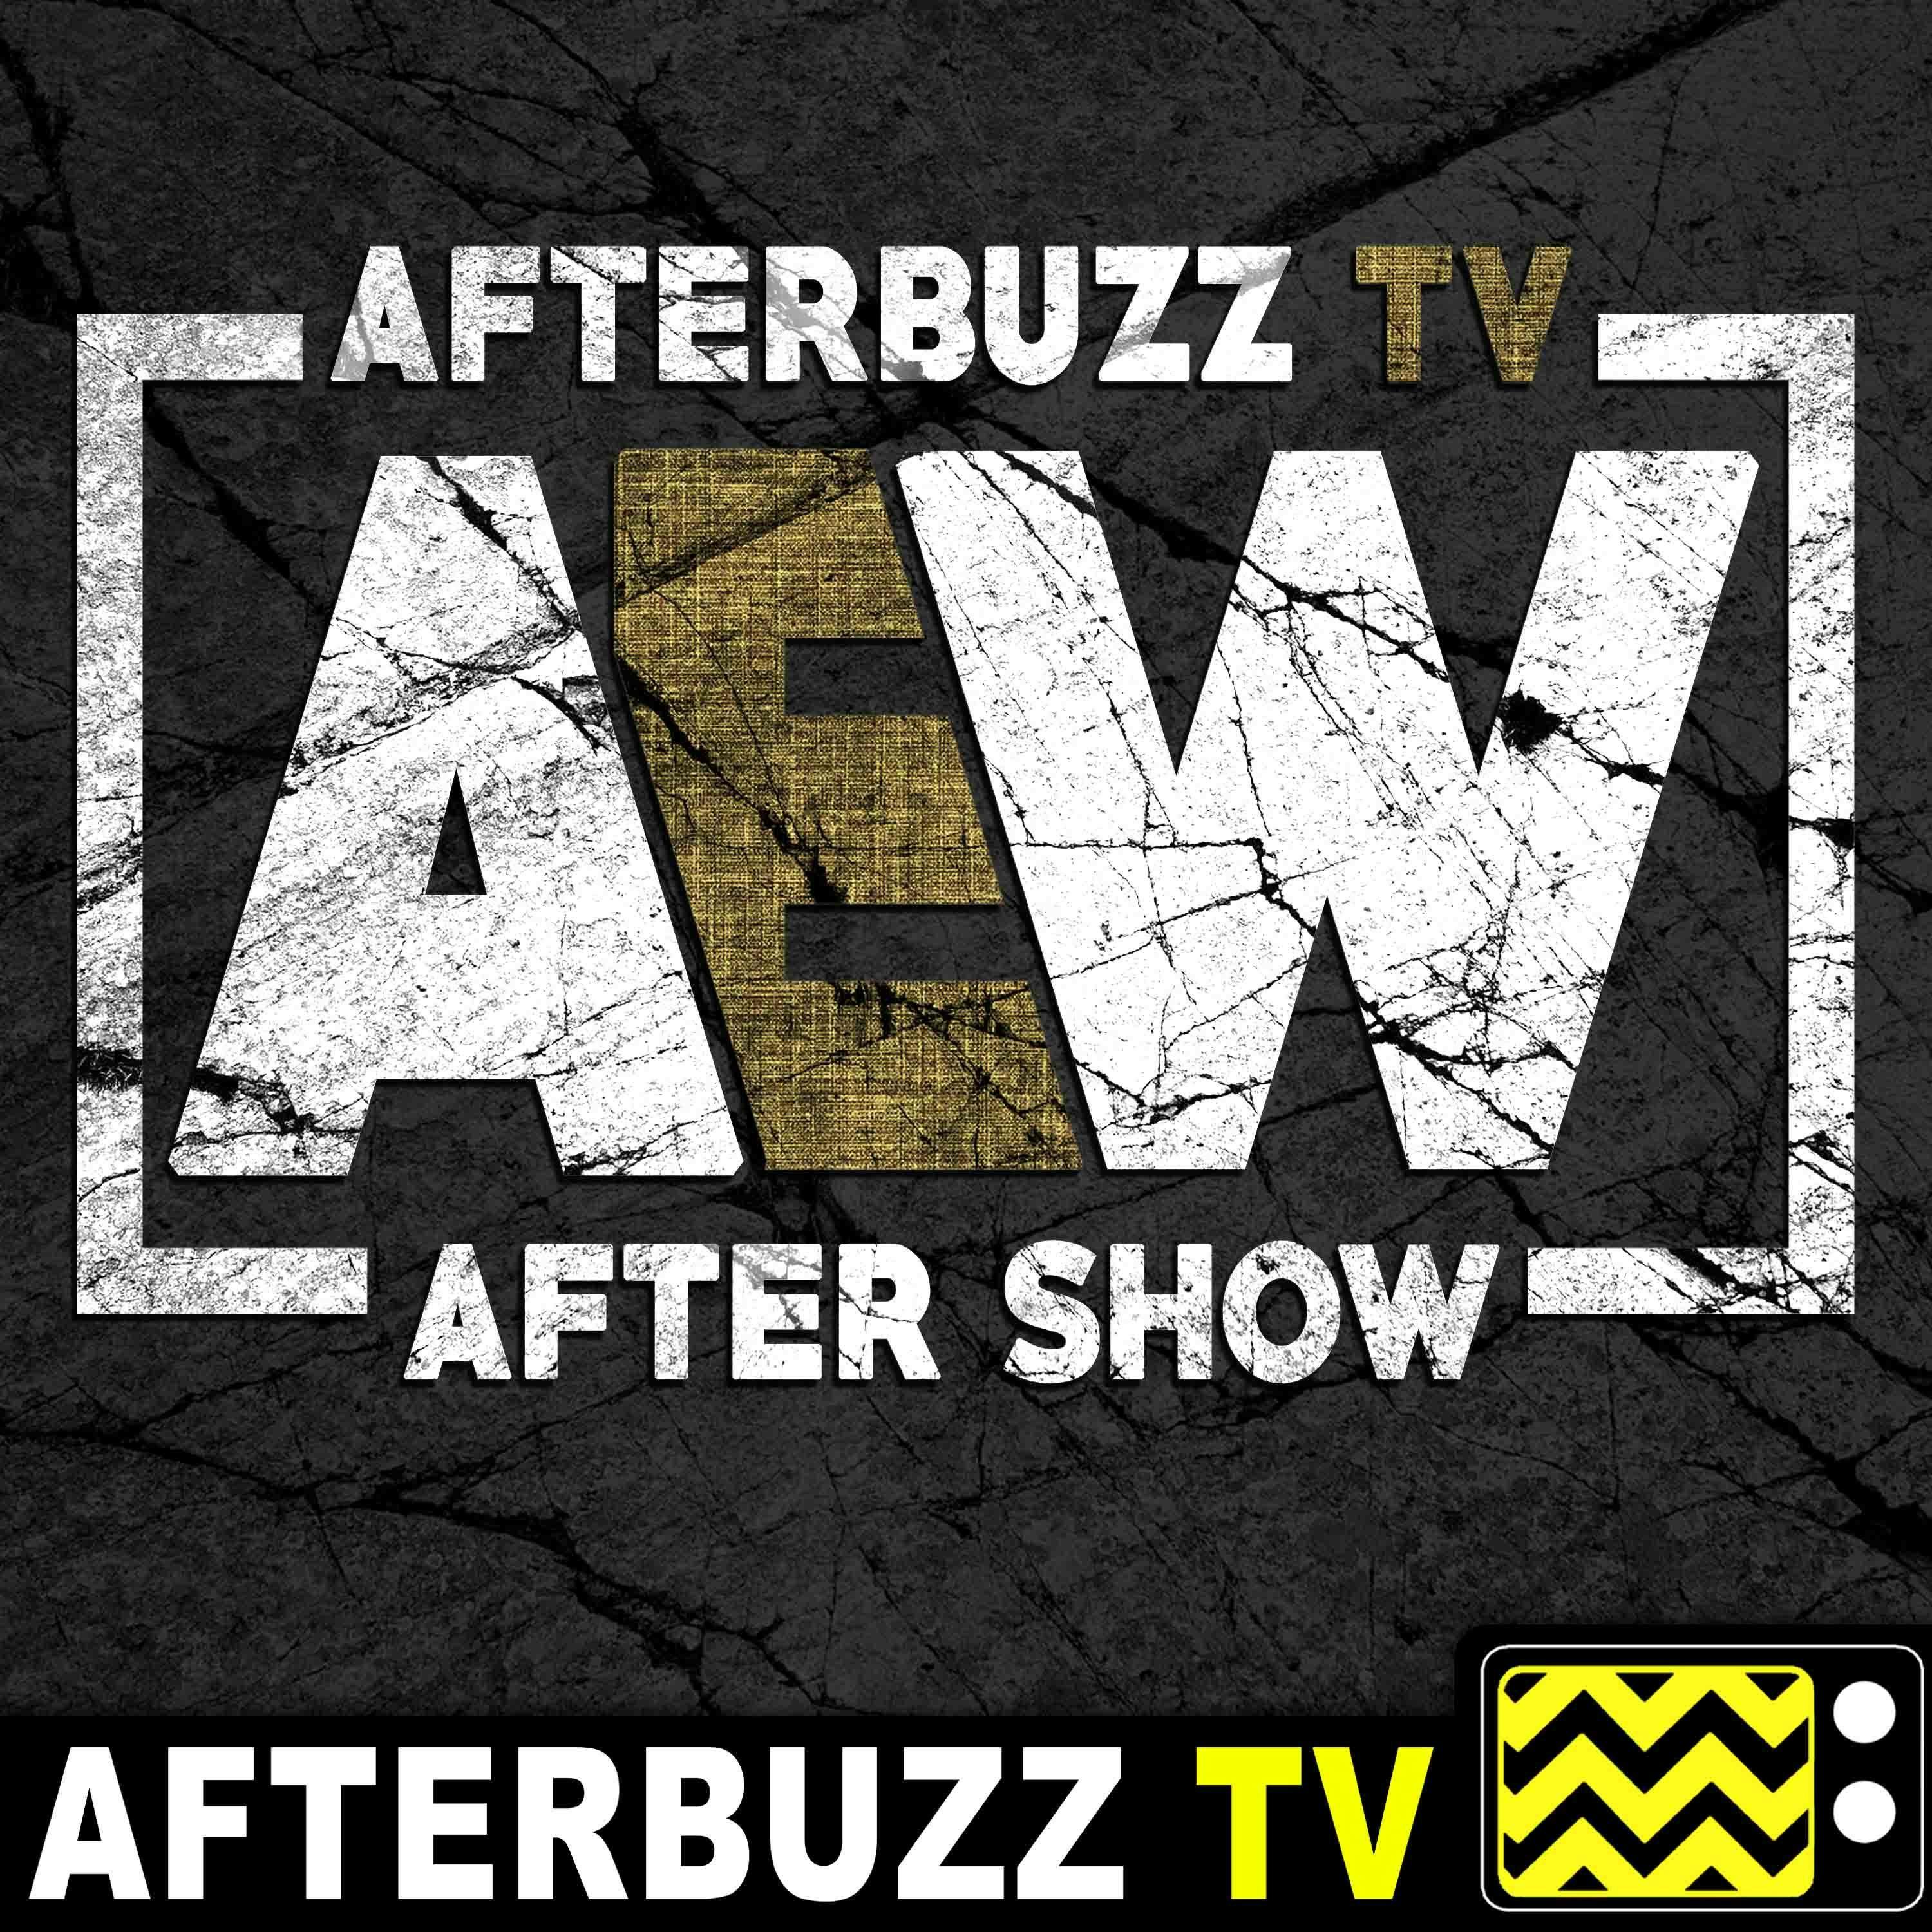 Jon Moxley Defeats the Undefeated Jake Hager to Retain his AEW World Title! - All Elite Wrestling After Show